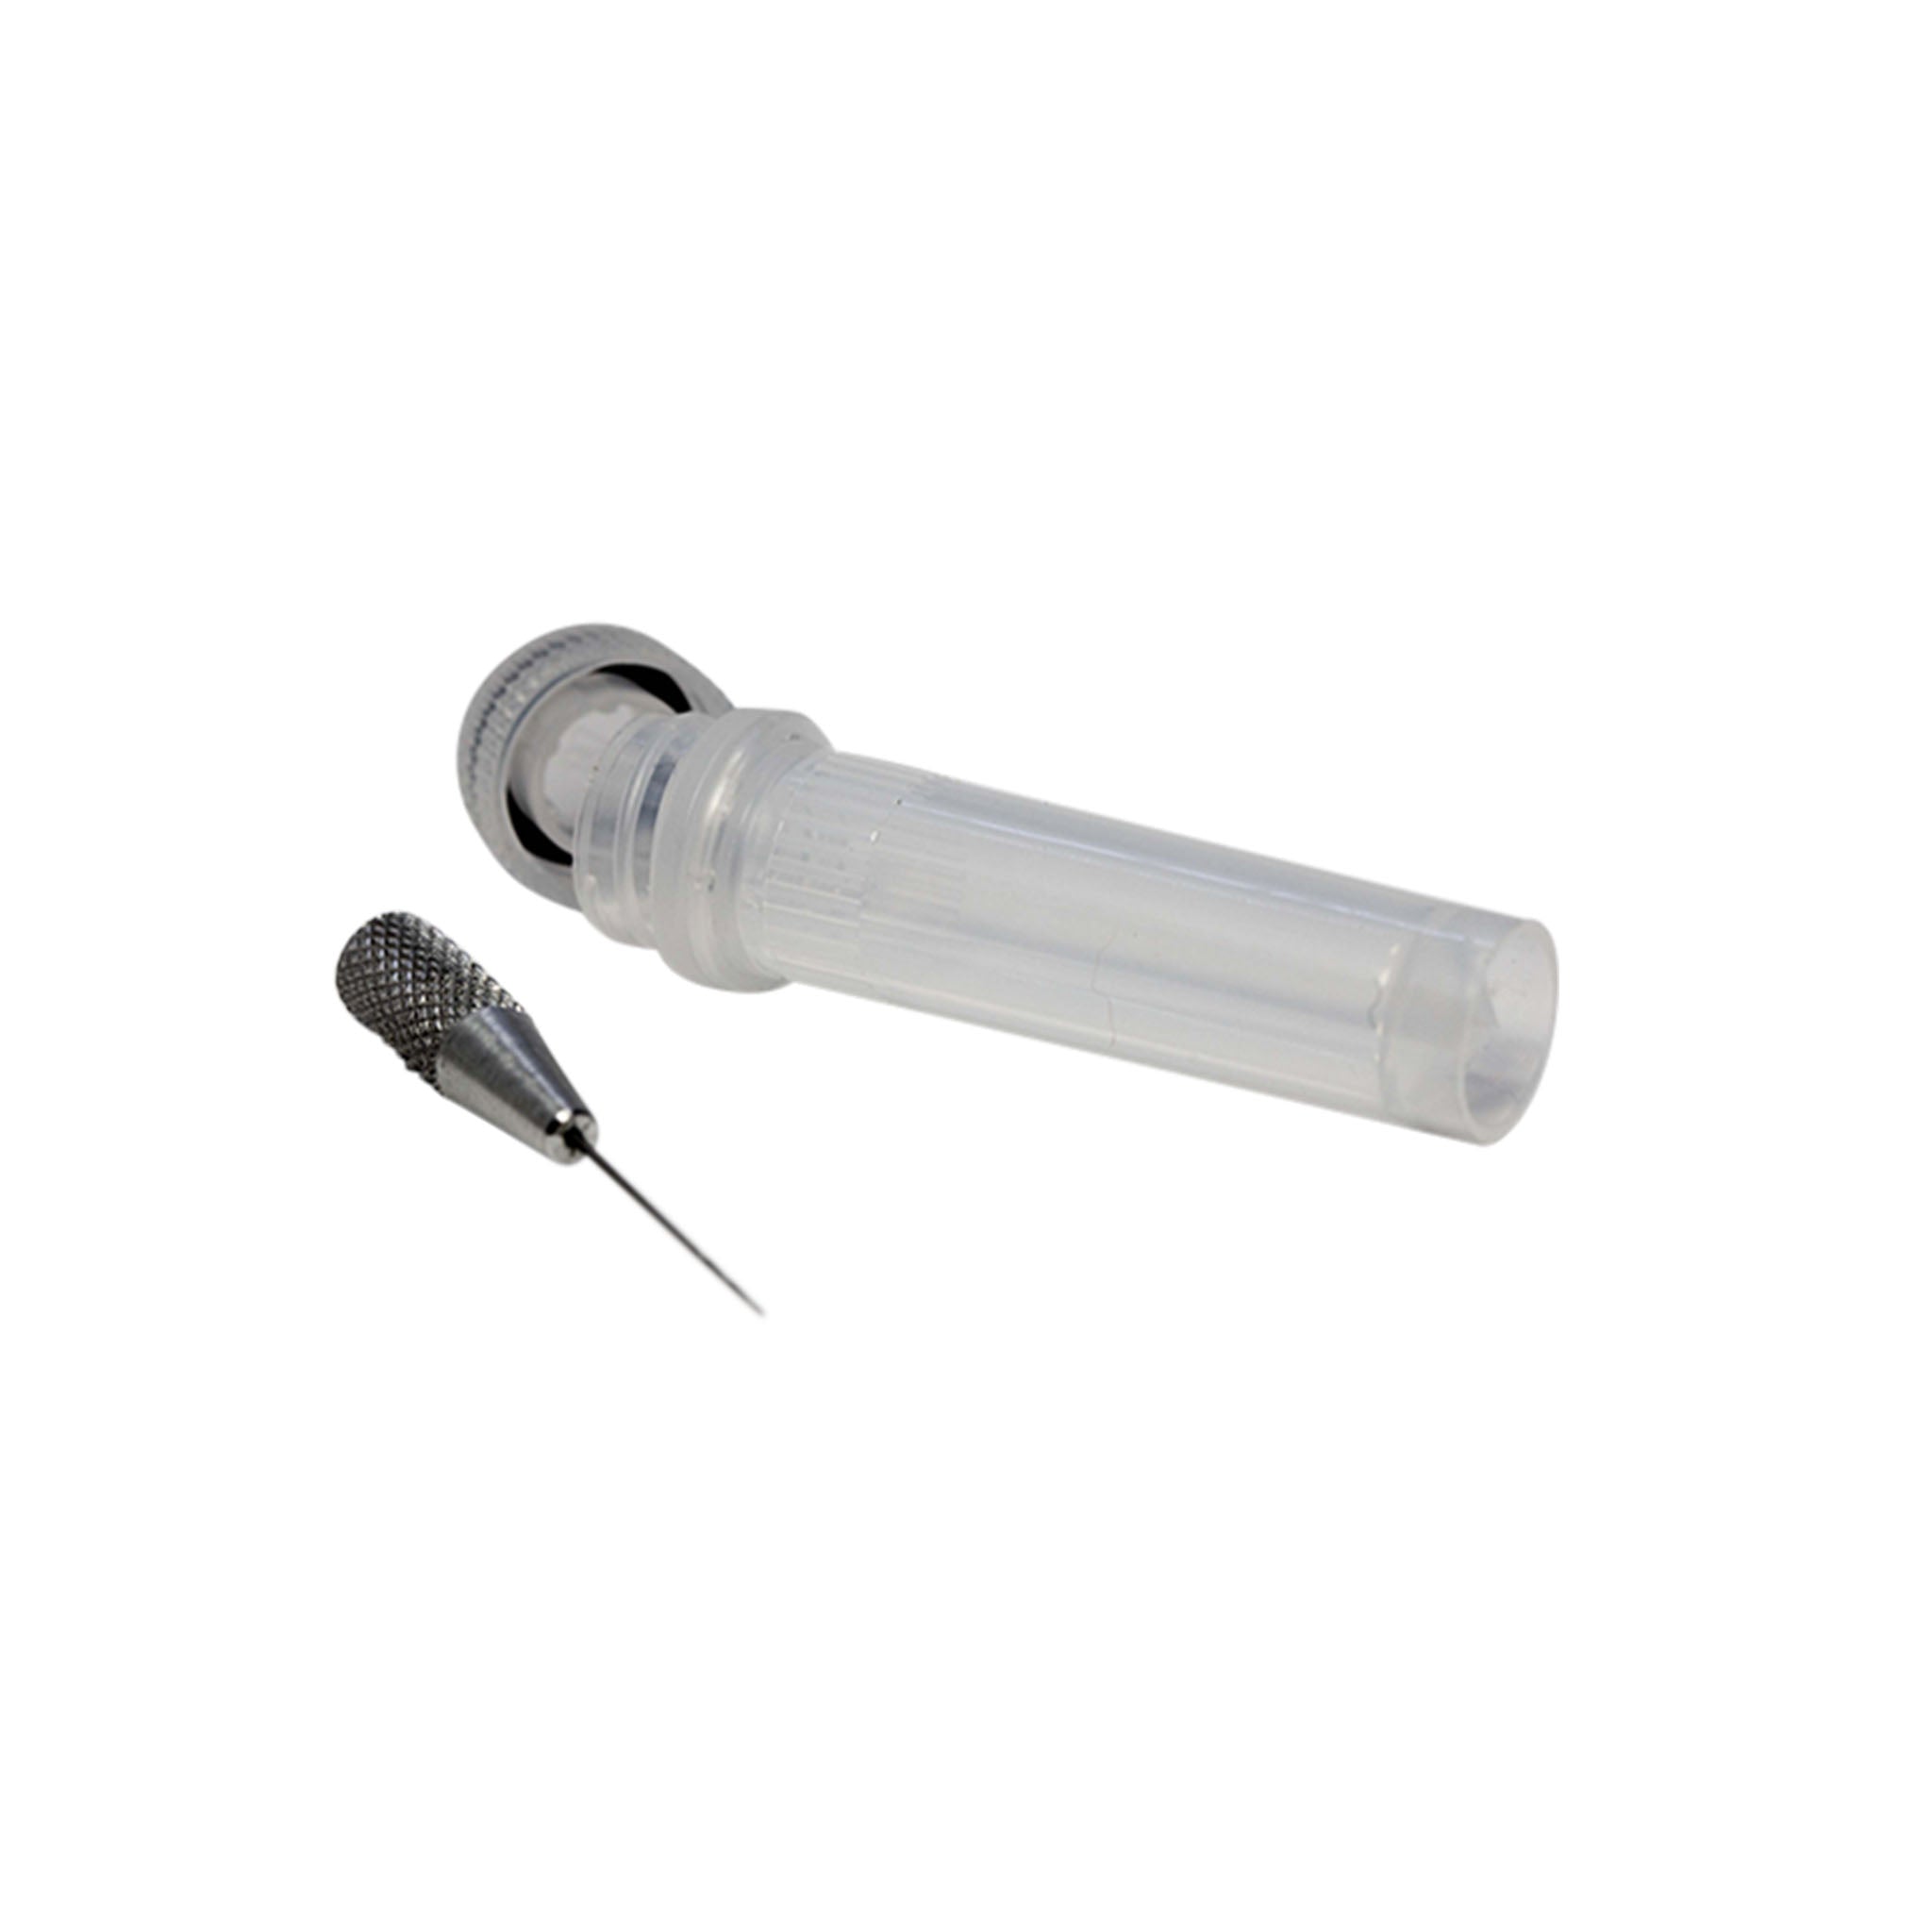 Nozzle Tip Cleaner with Capsule